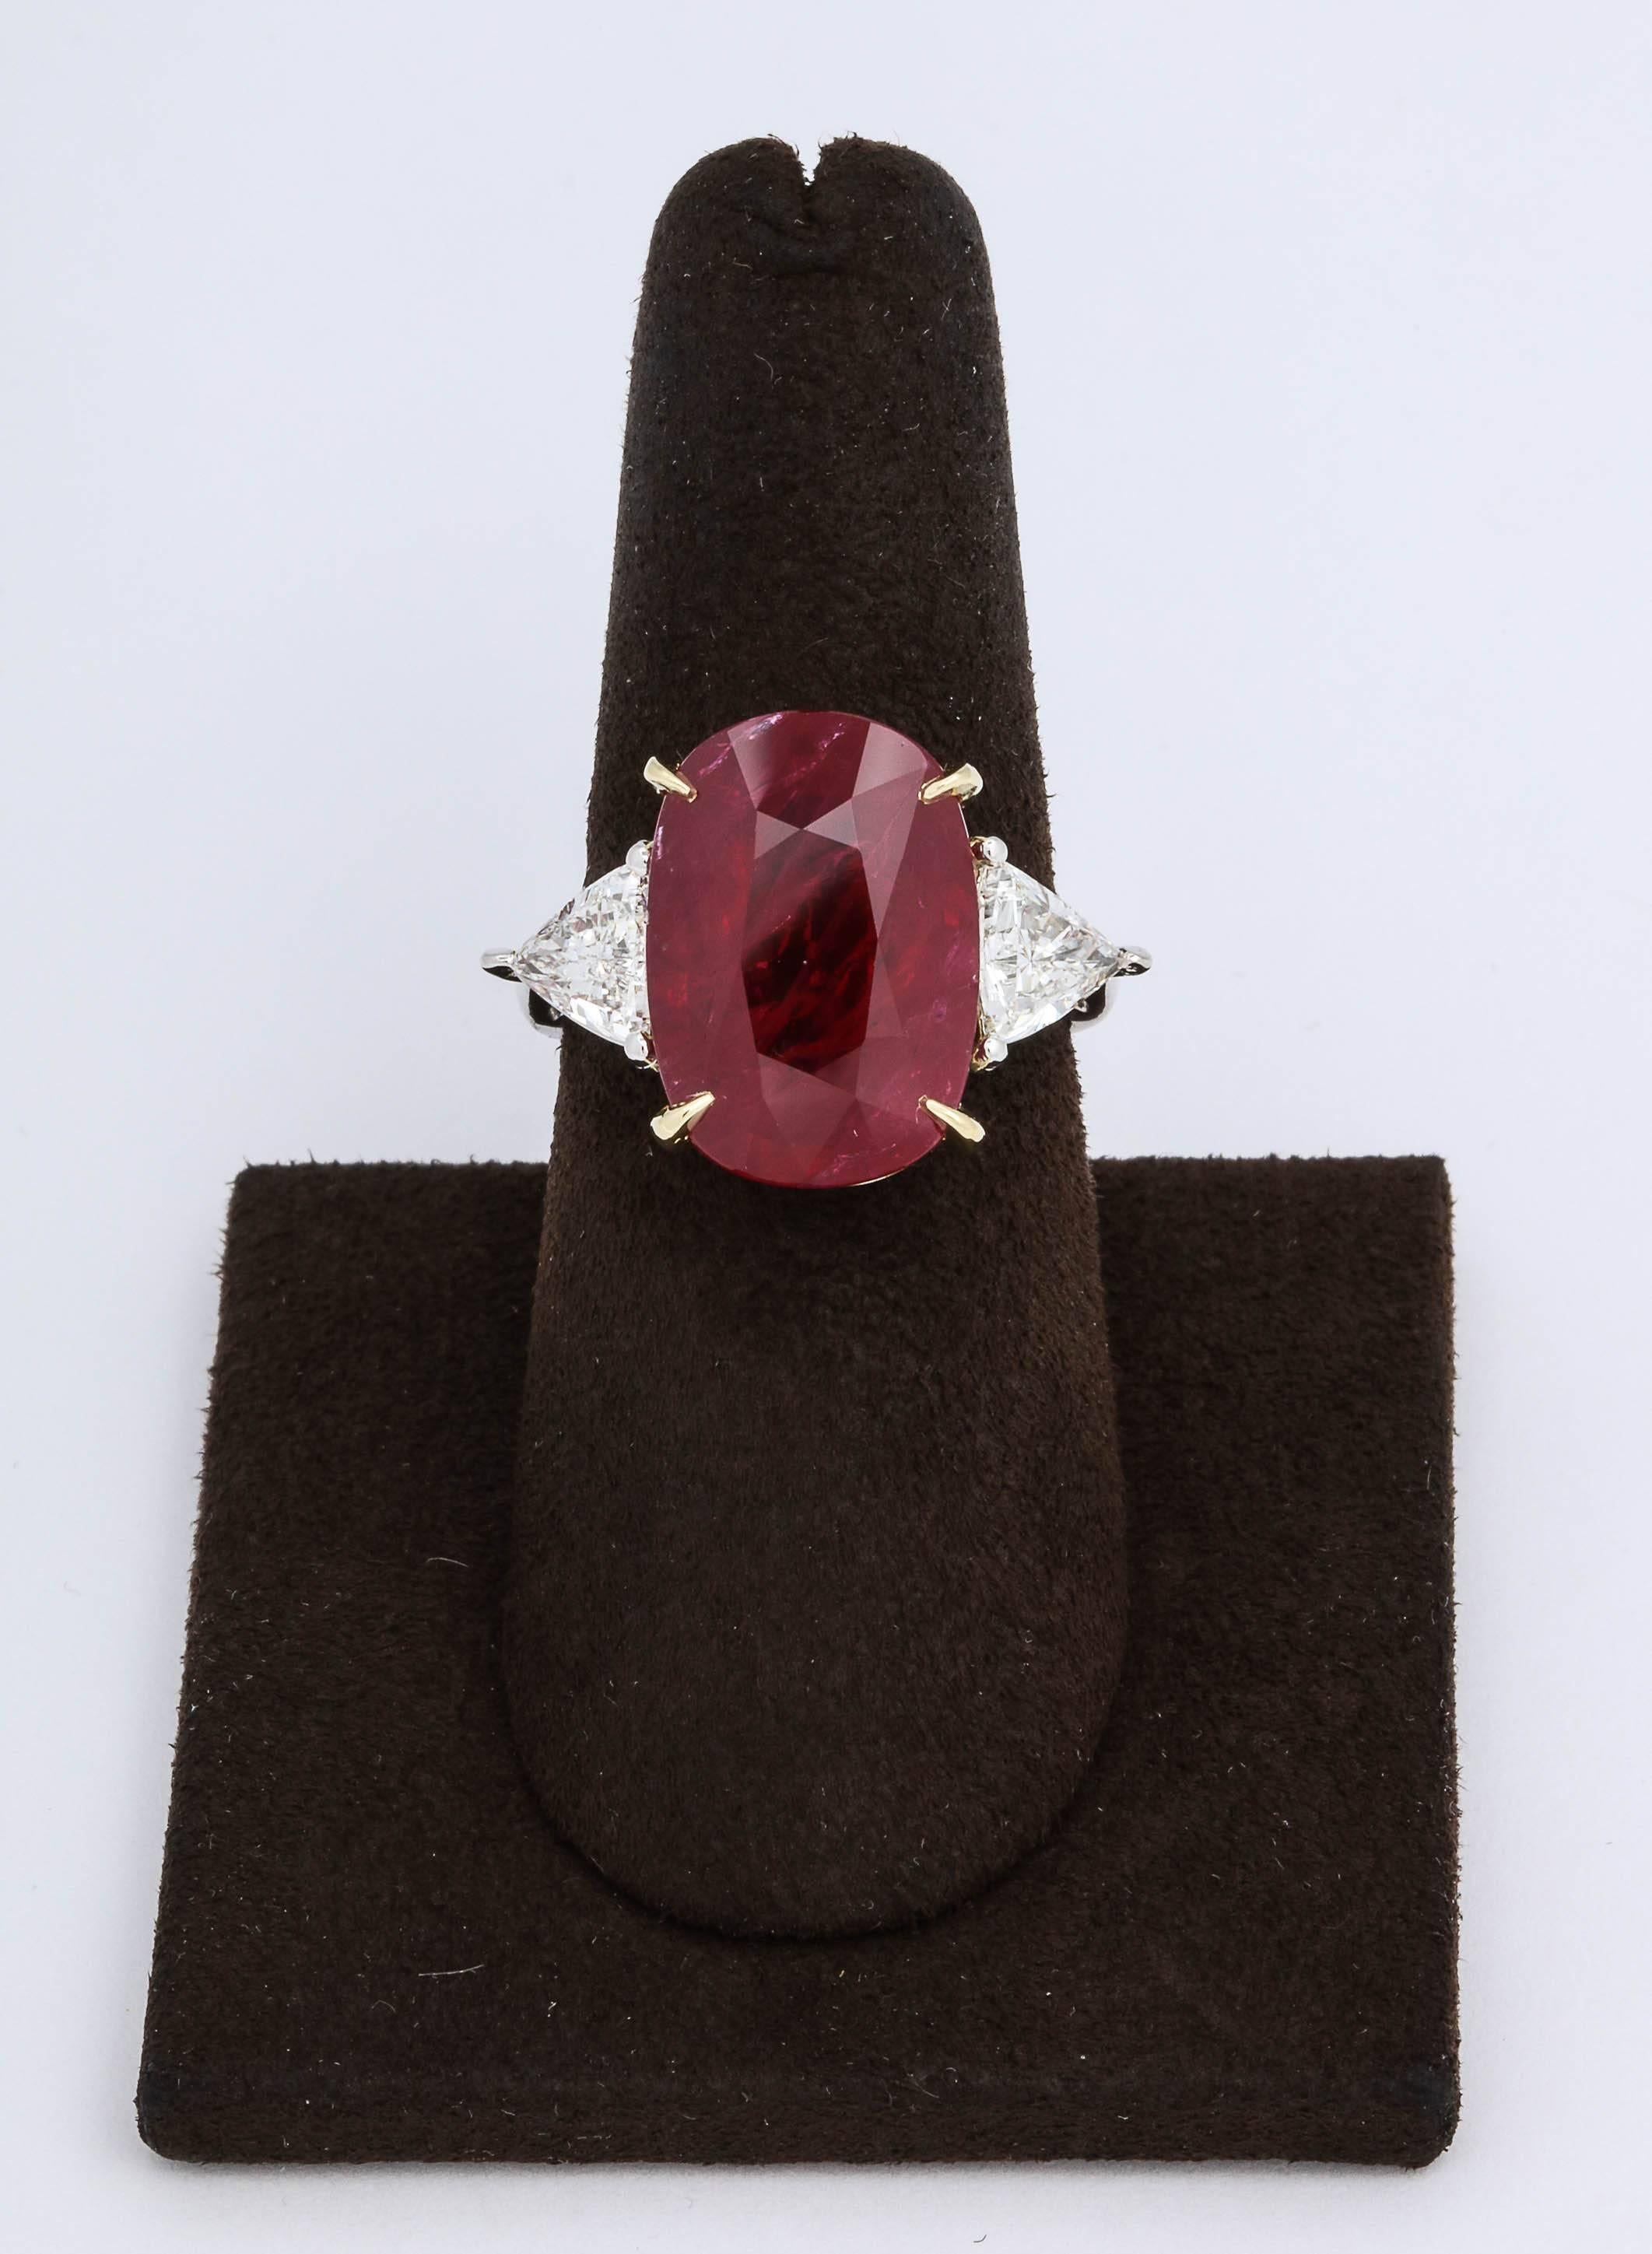 
A stunning center Ruby rich in color, a fantastic ring!

A beautiful elongated cushion cut red ruby.

Set with 1.29 carats of trillion cut diamonds.

The center Ruby measures 16.51 x 11.57 mm -- its a Fabulous shape!

Platinum and 18k yellow